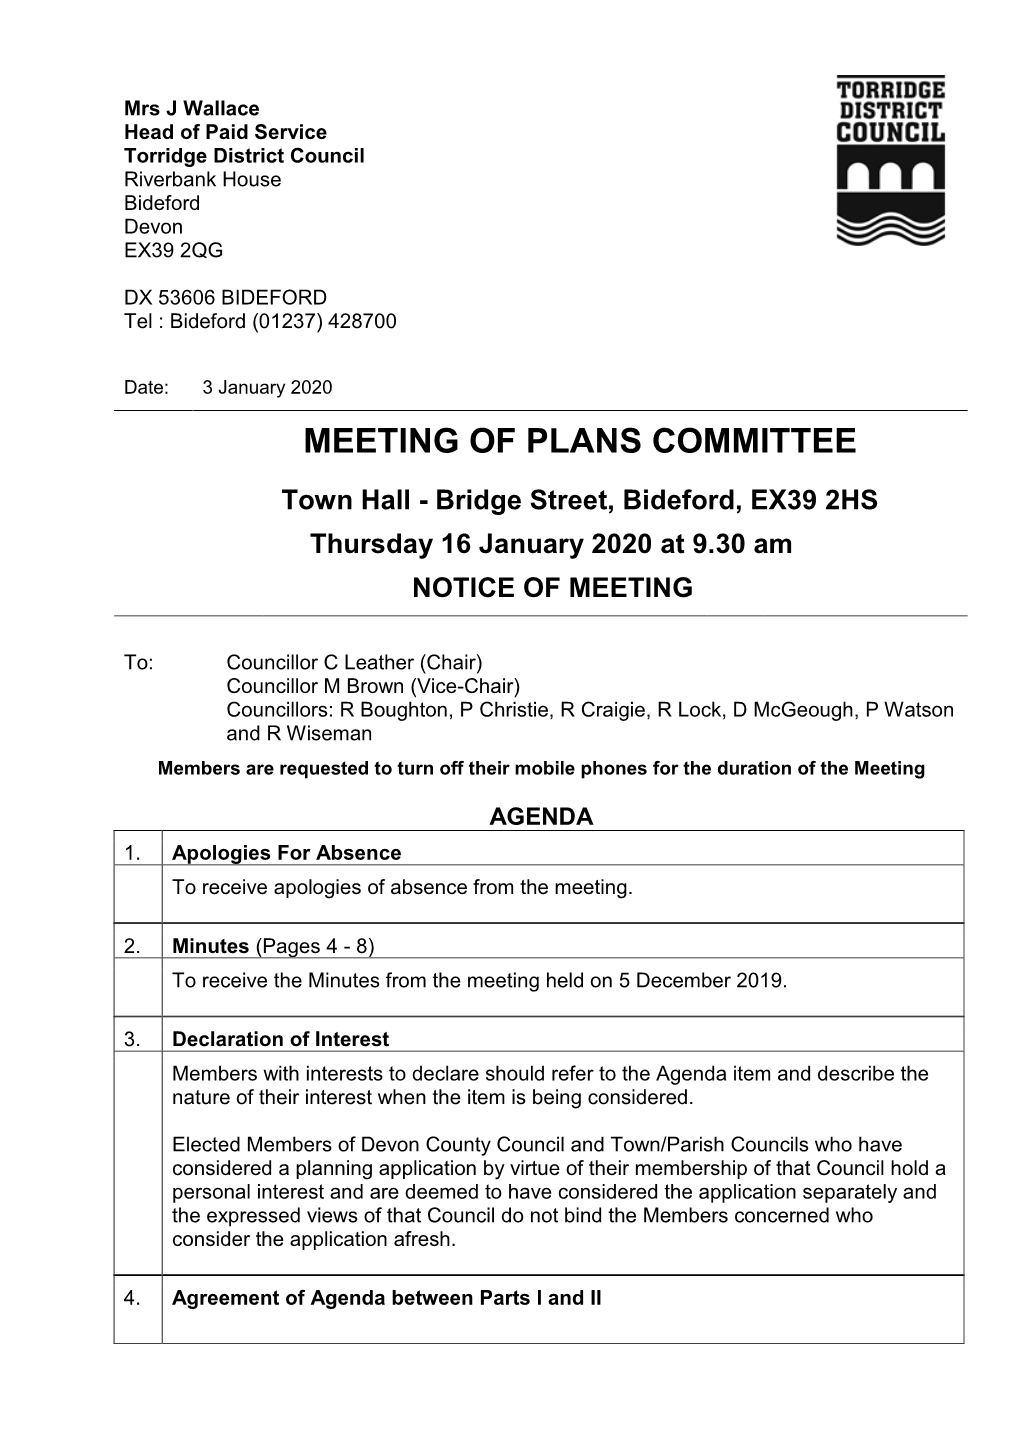 (Public Pack)Agenda Document for Plans Committee, 16/01/2020 09:30